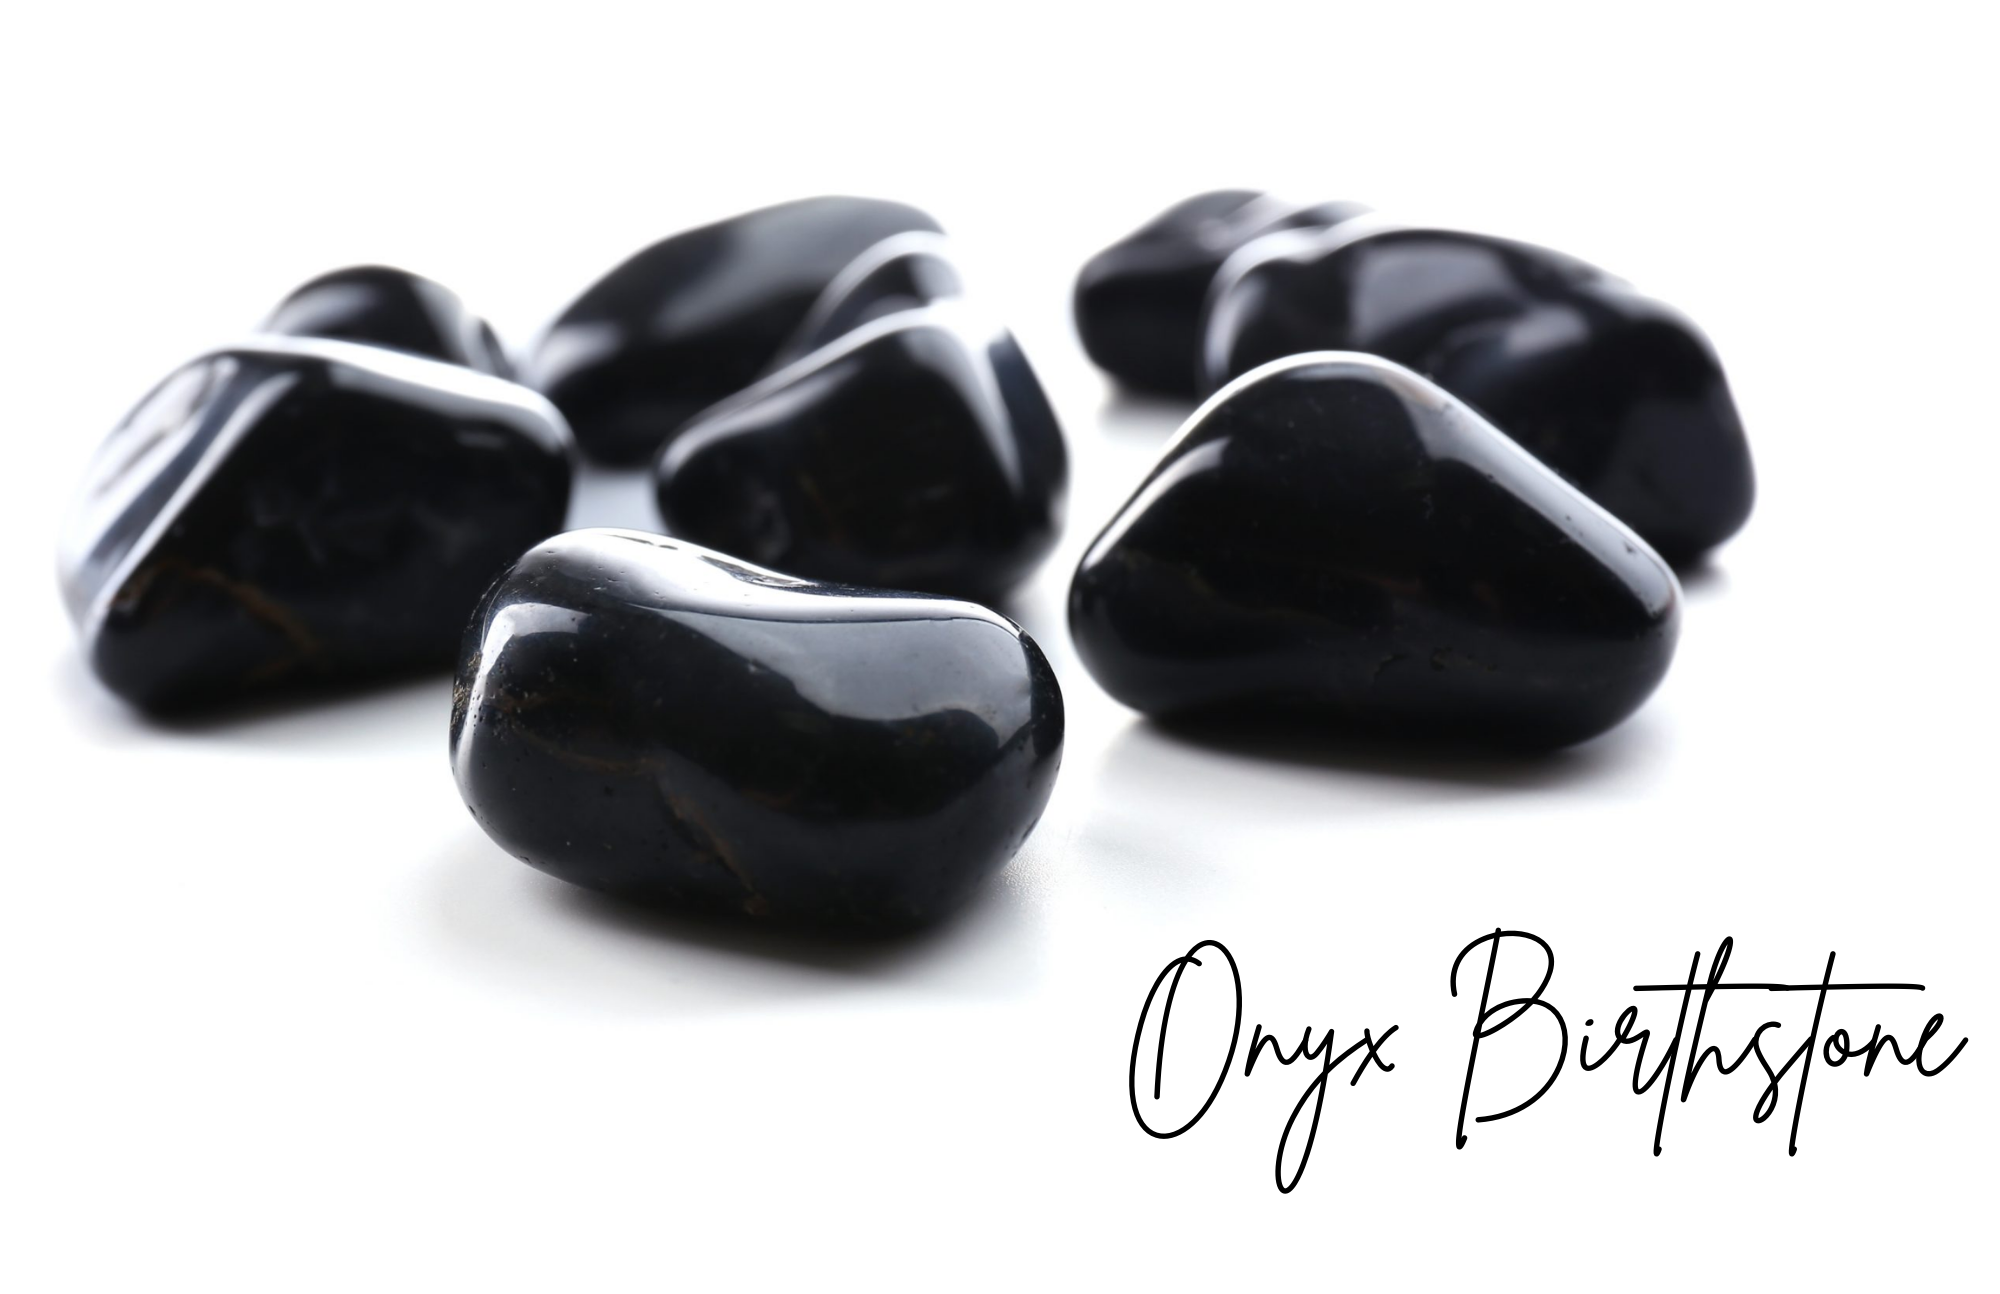 Onyx Birthstone - Onyx Stone's Growing Appeal To The Public Especially